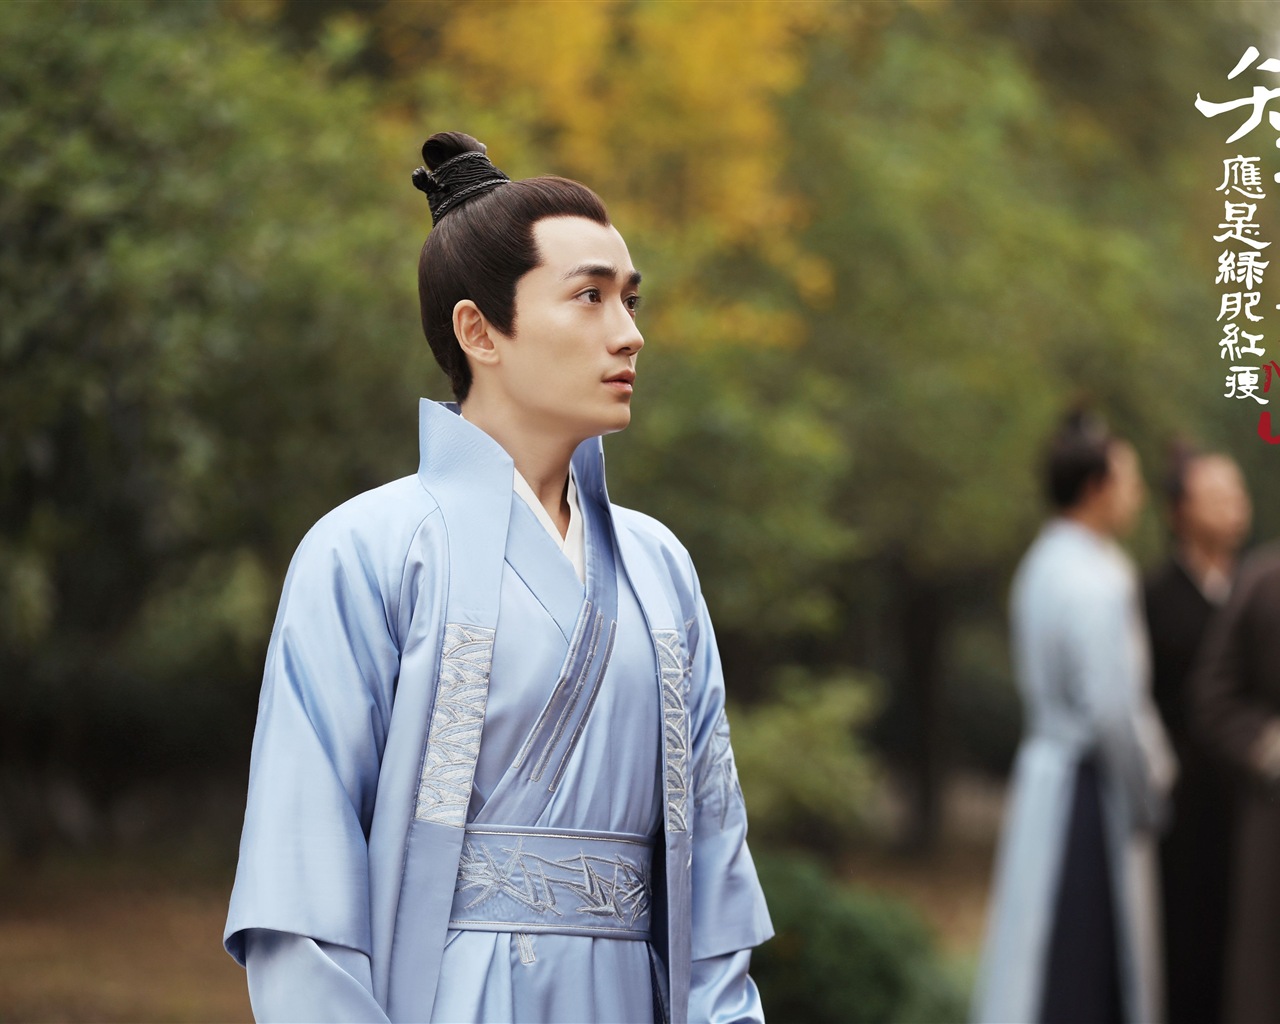 The Story Of MingLan, TV series HD wallpapers #55 - 1280x1024